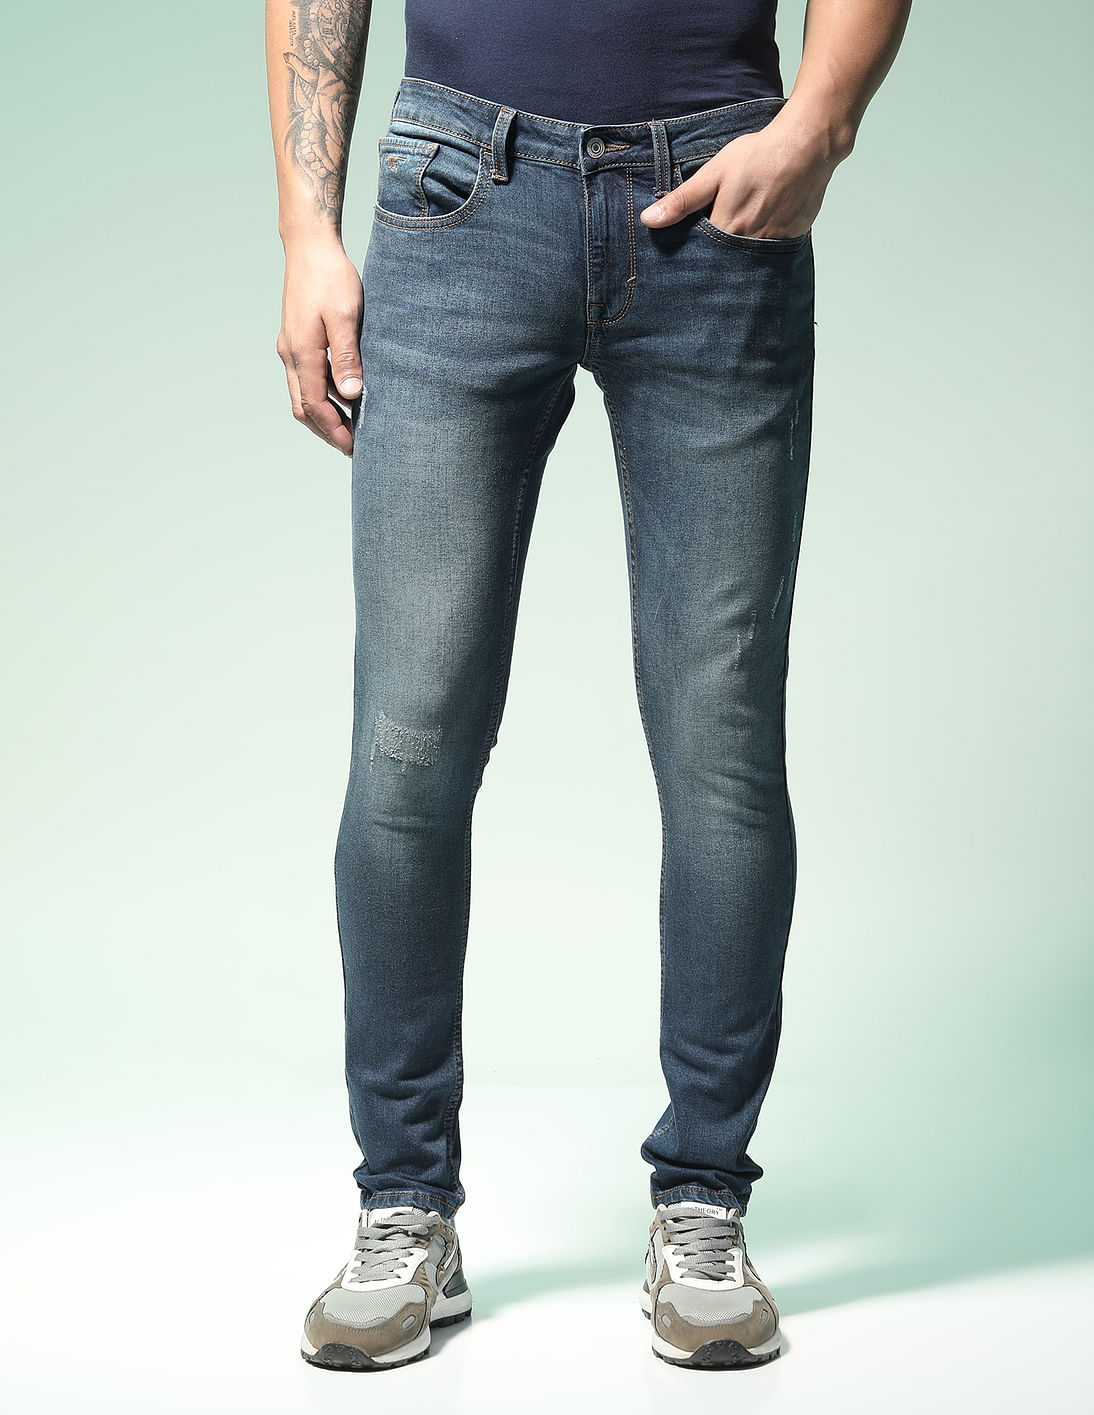 Buy Flying Machine Jackson Skinny Fit Whiskered Jeans - NNNOW.com